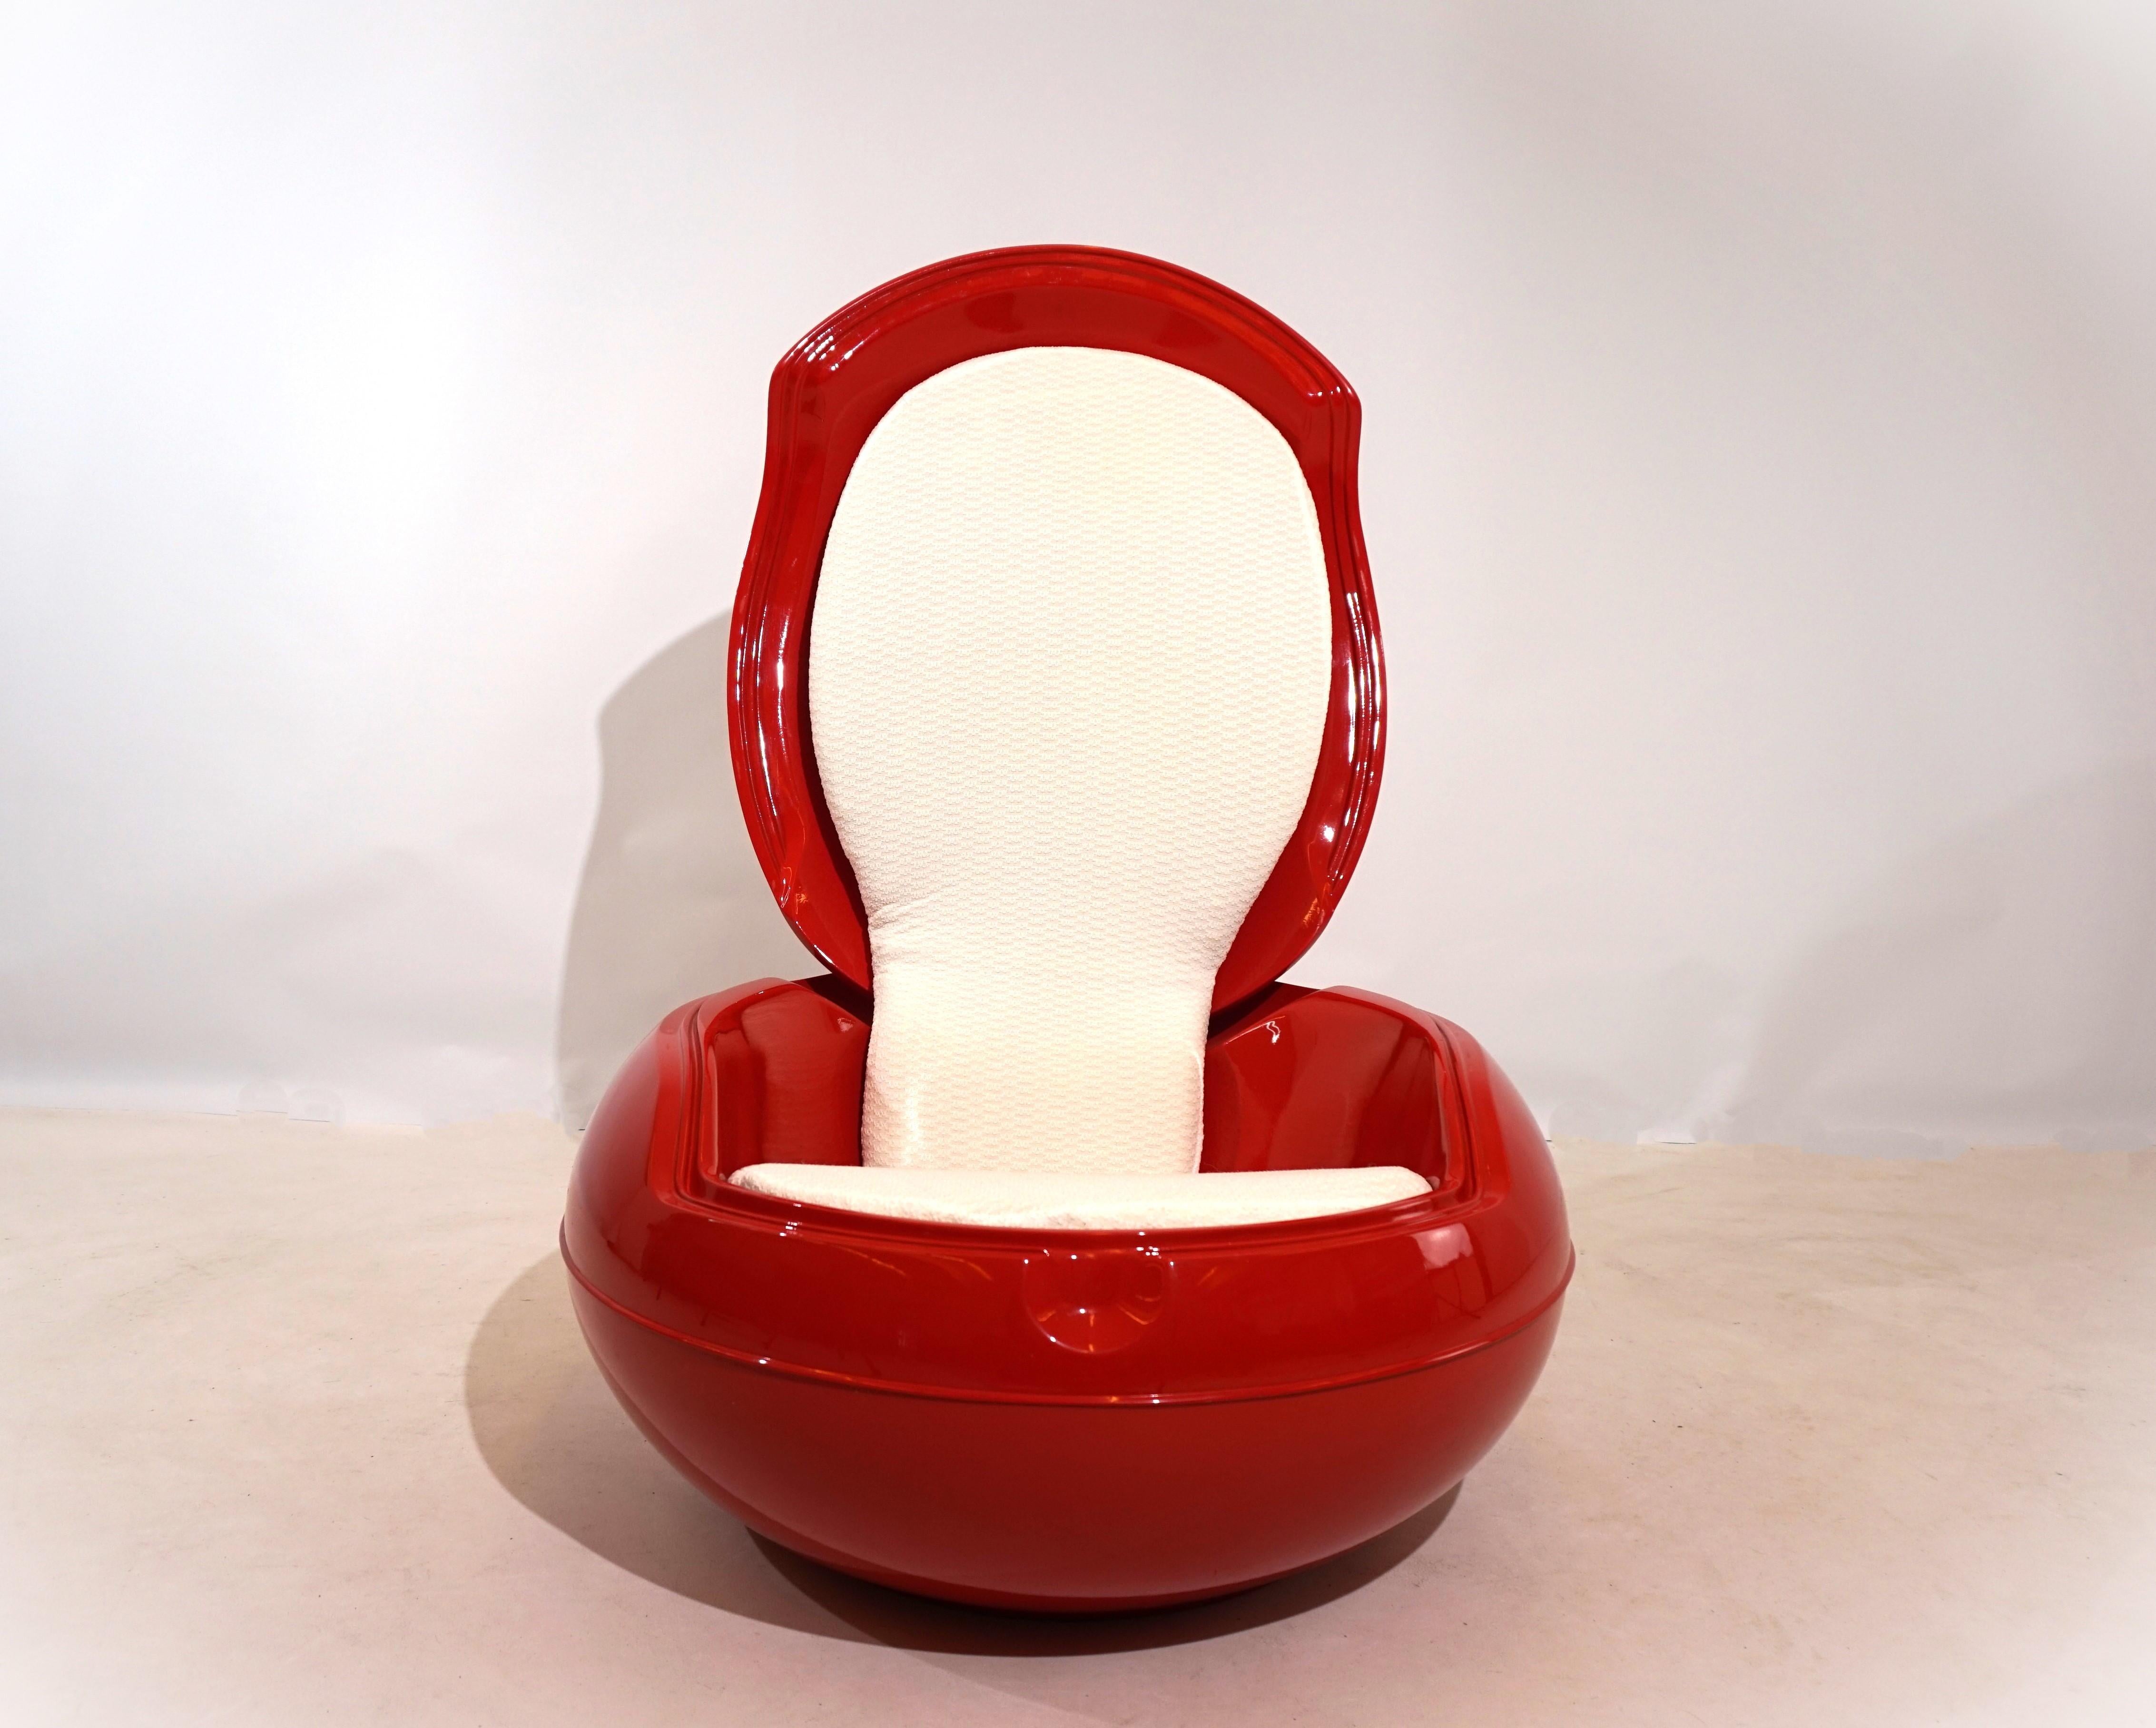 German Garden Egg armchair by Peter Ghyczy for Reuter